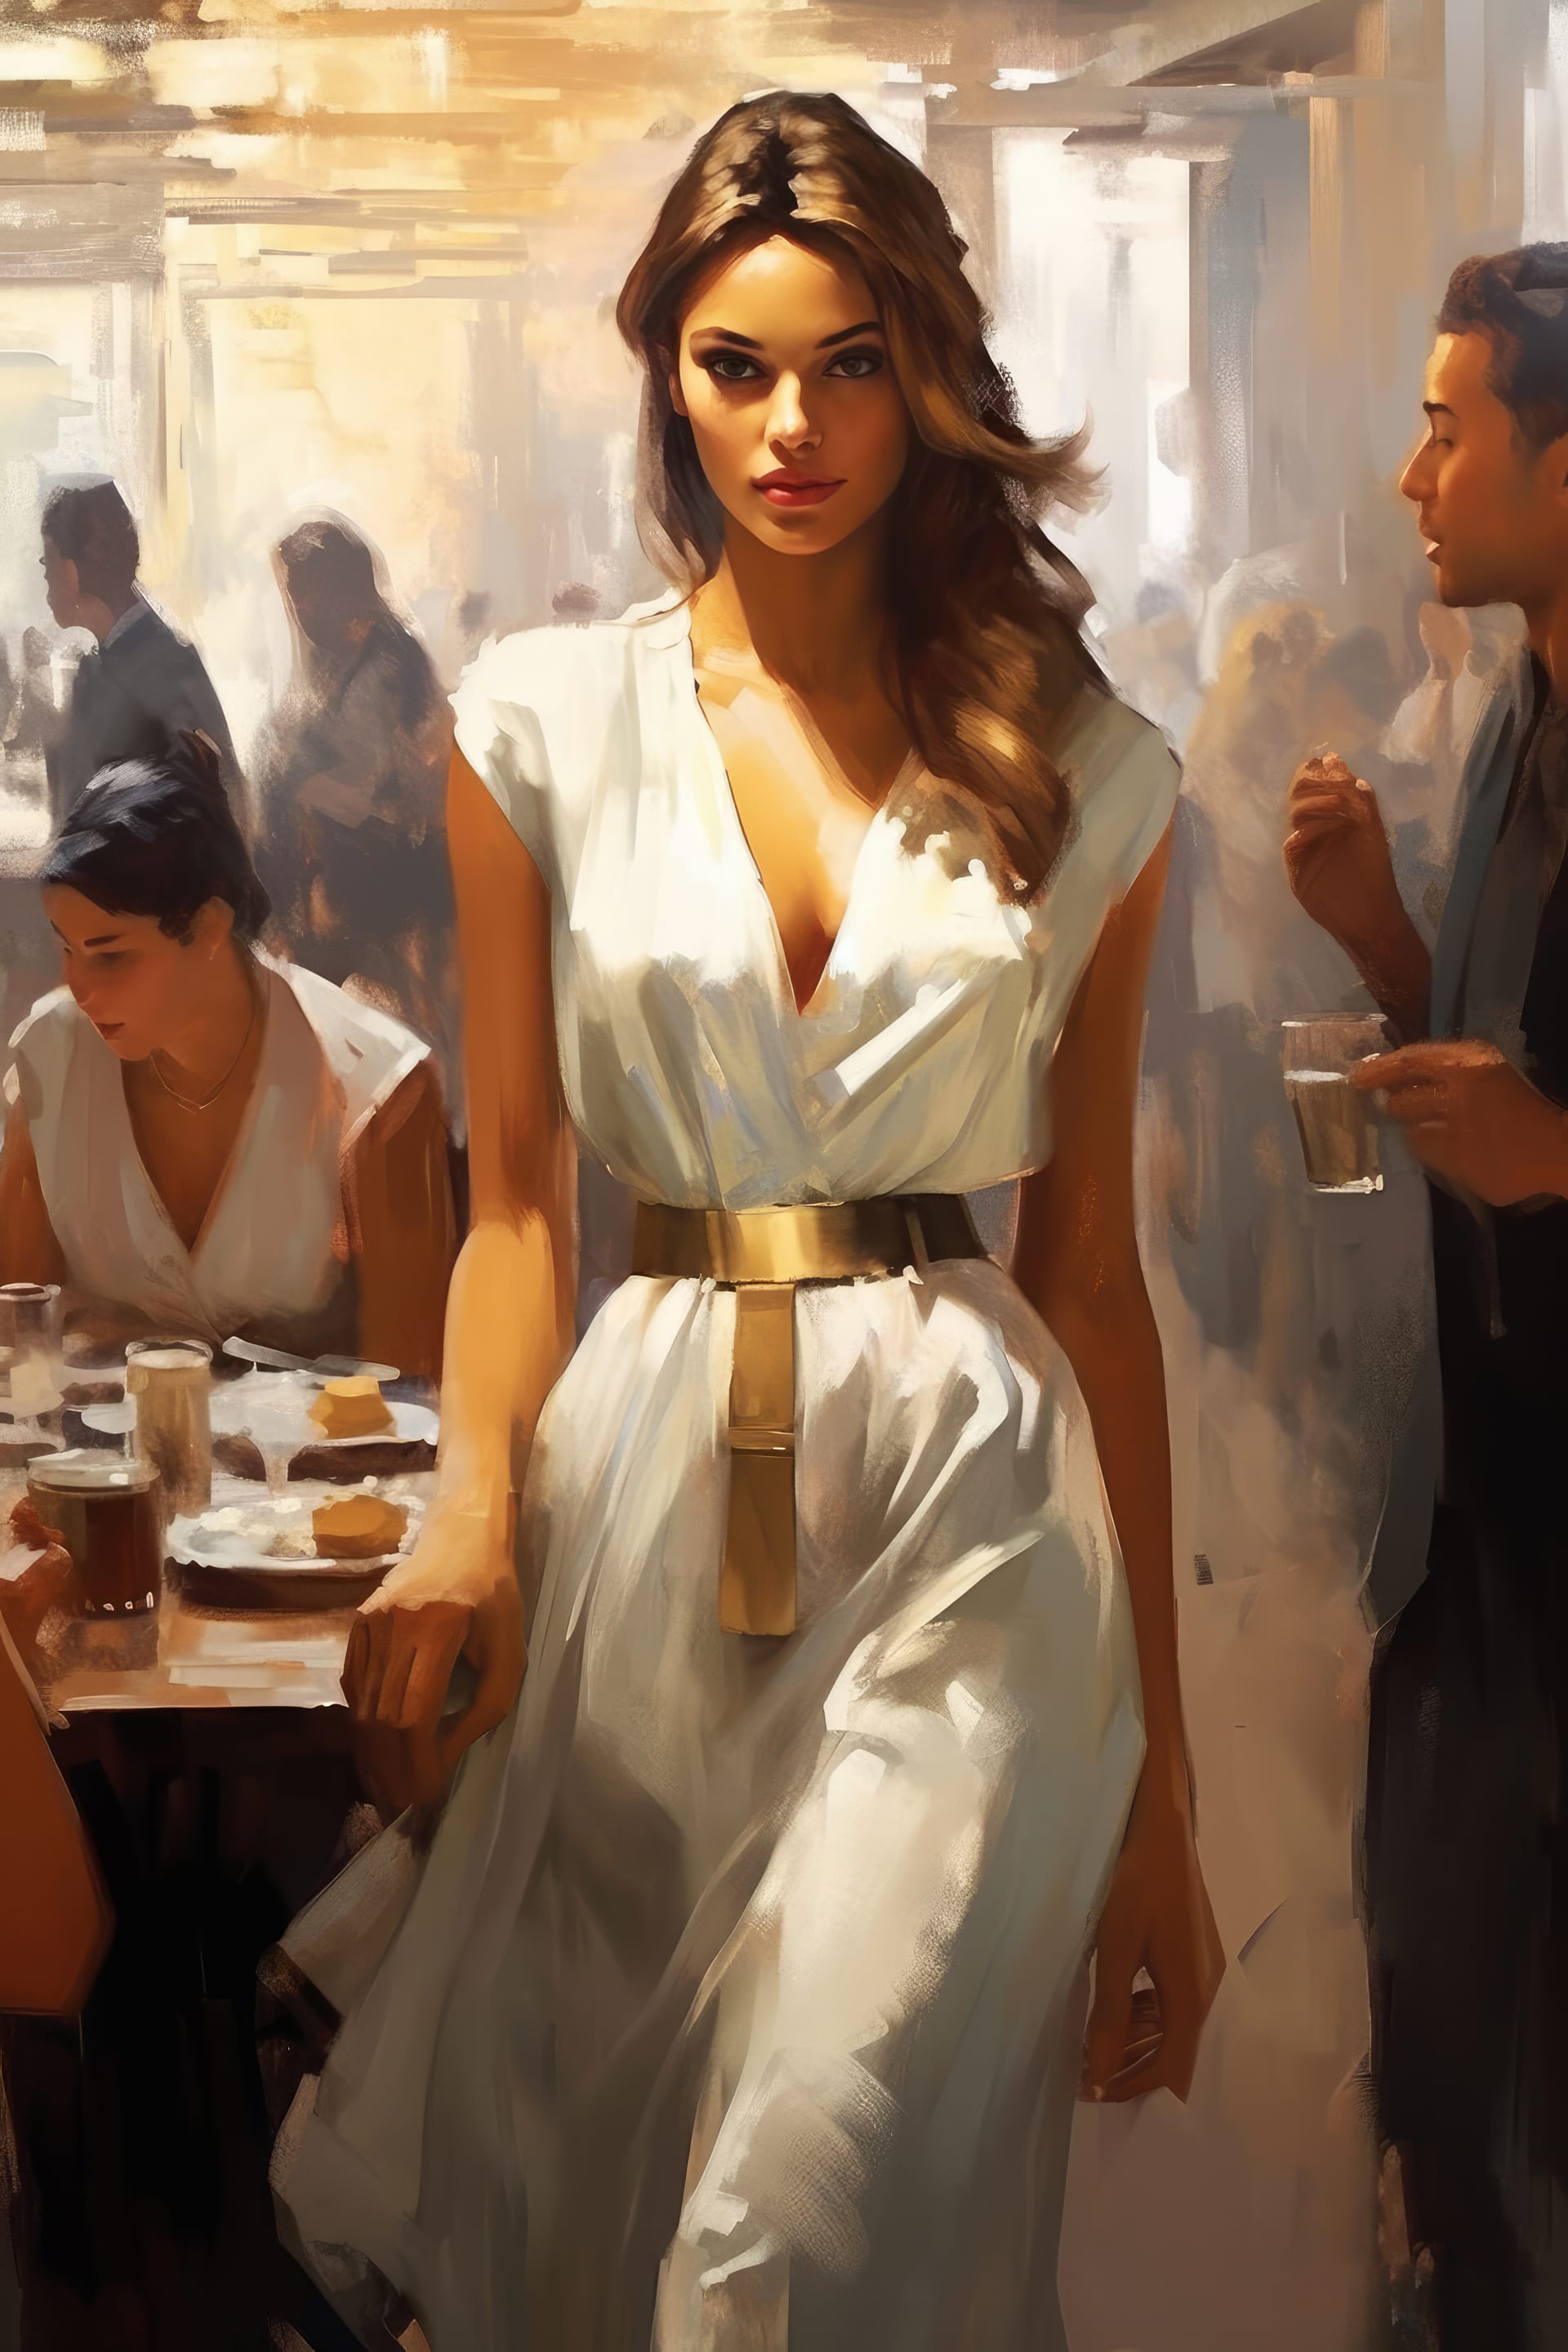 Painting woman white dress with gold belt